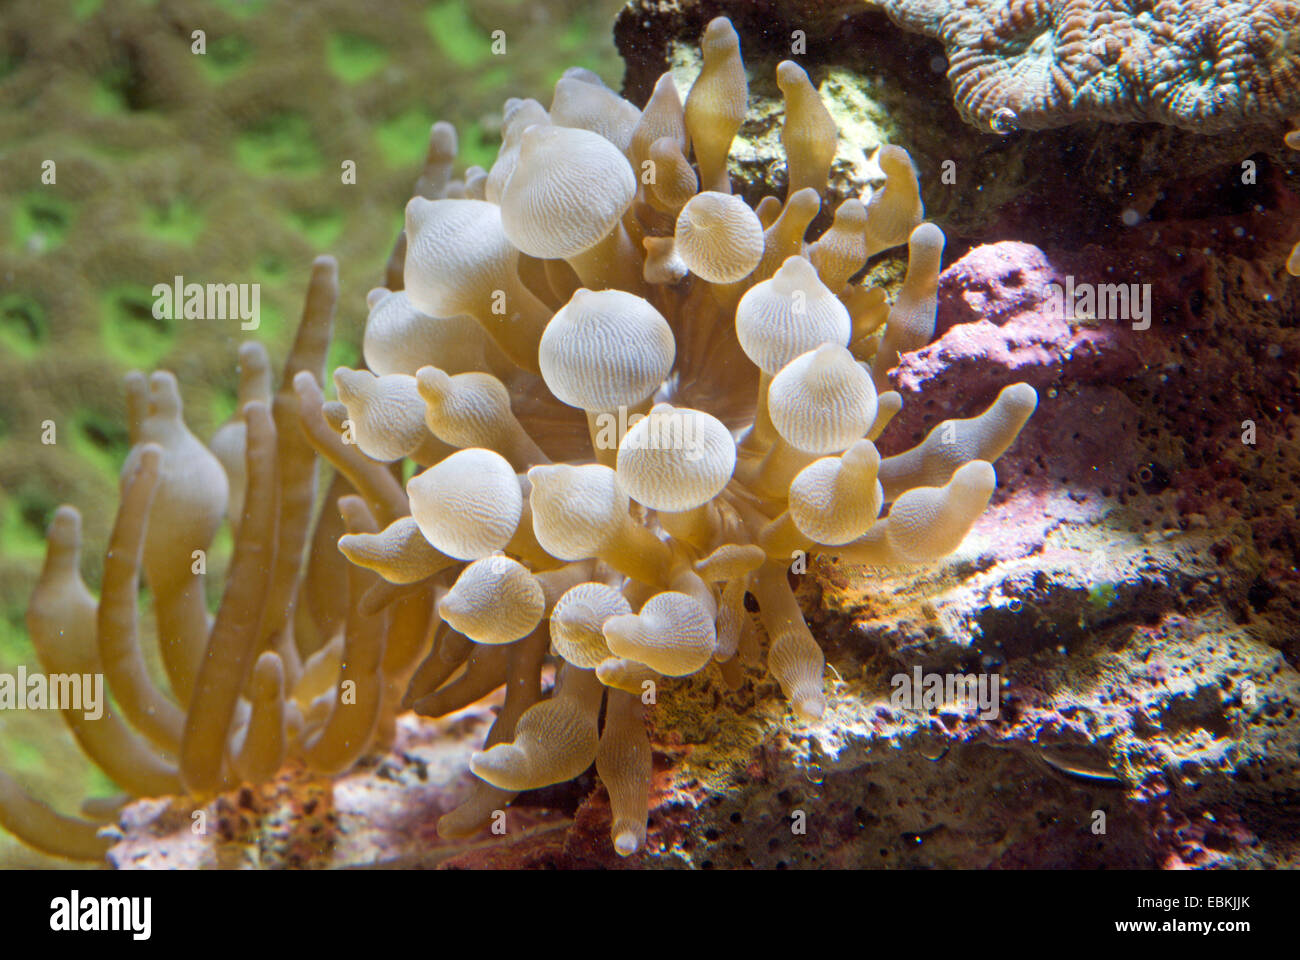 four-colored anemone, bubble-tip anemone, bulb-tip anemone, bulb-tentacle sea anemone, maroon anemone (Entacmaea quadricolor), high angle view Stock Photo